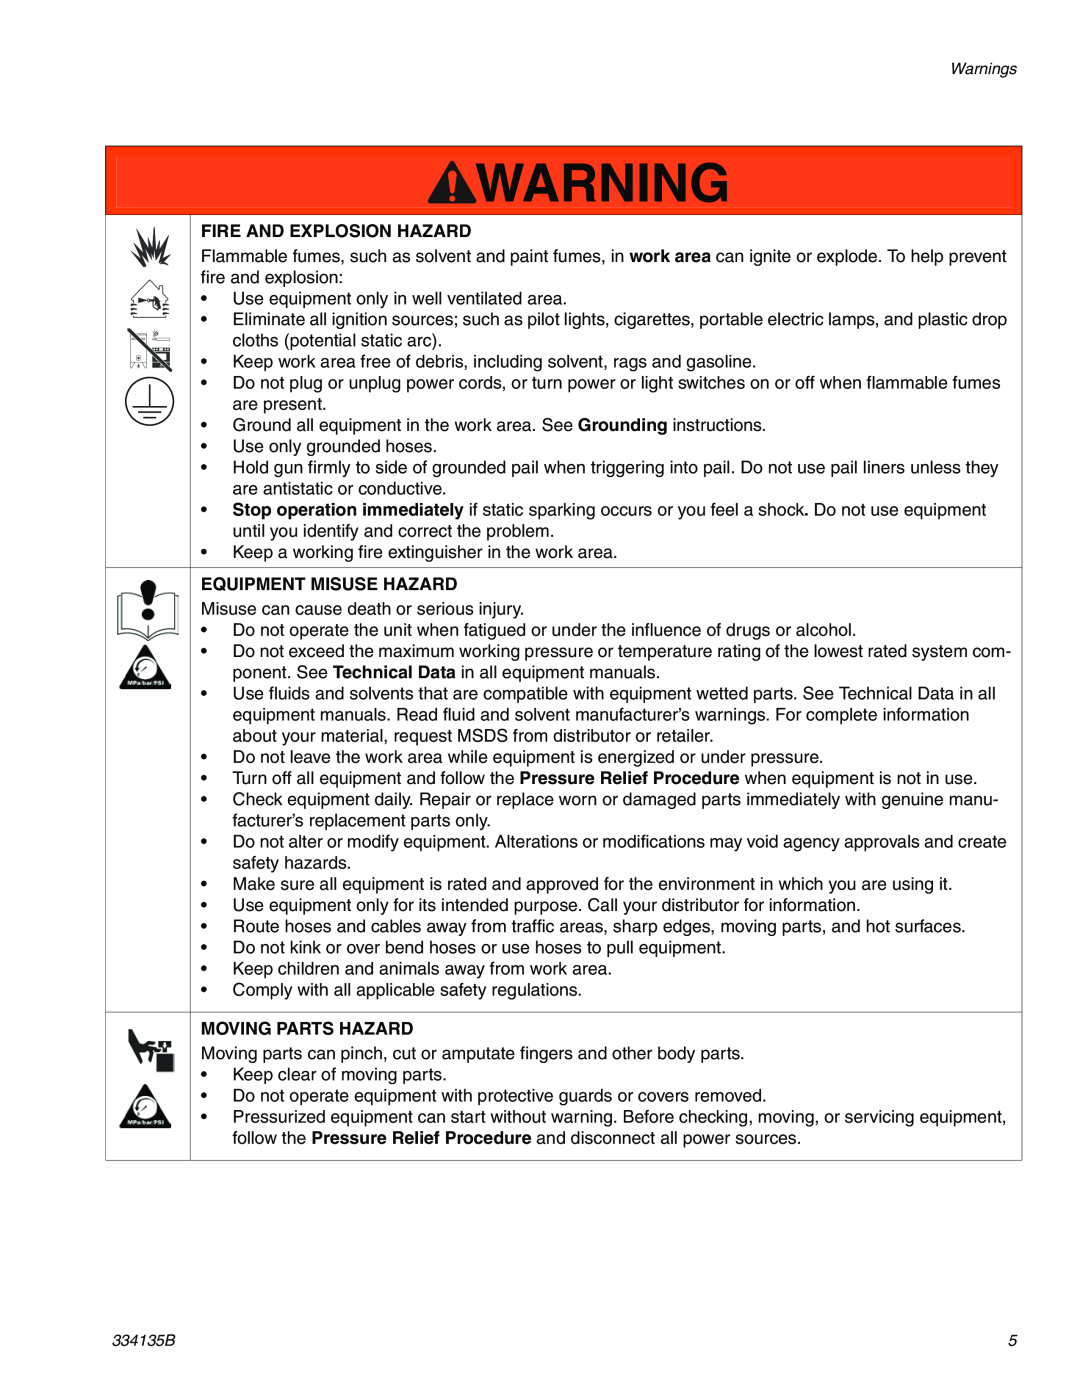 Graco 334135B important safety instructions Fire And Explosion Hazard, Equipment Misuse Hazard, Moving Parts Hazard 